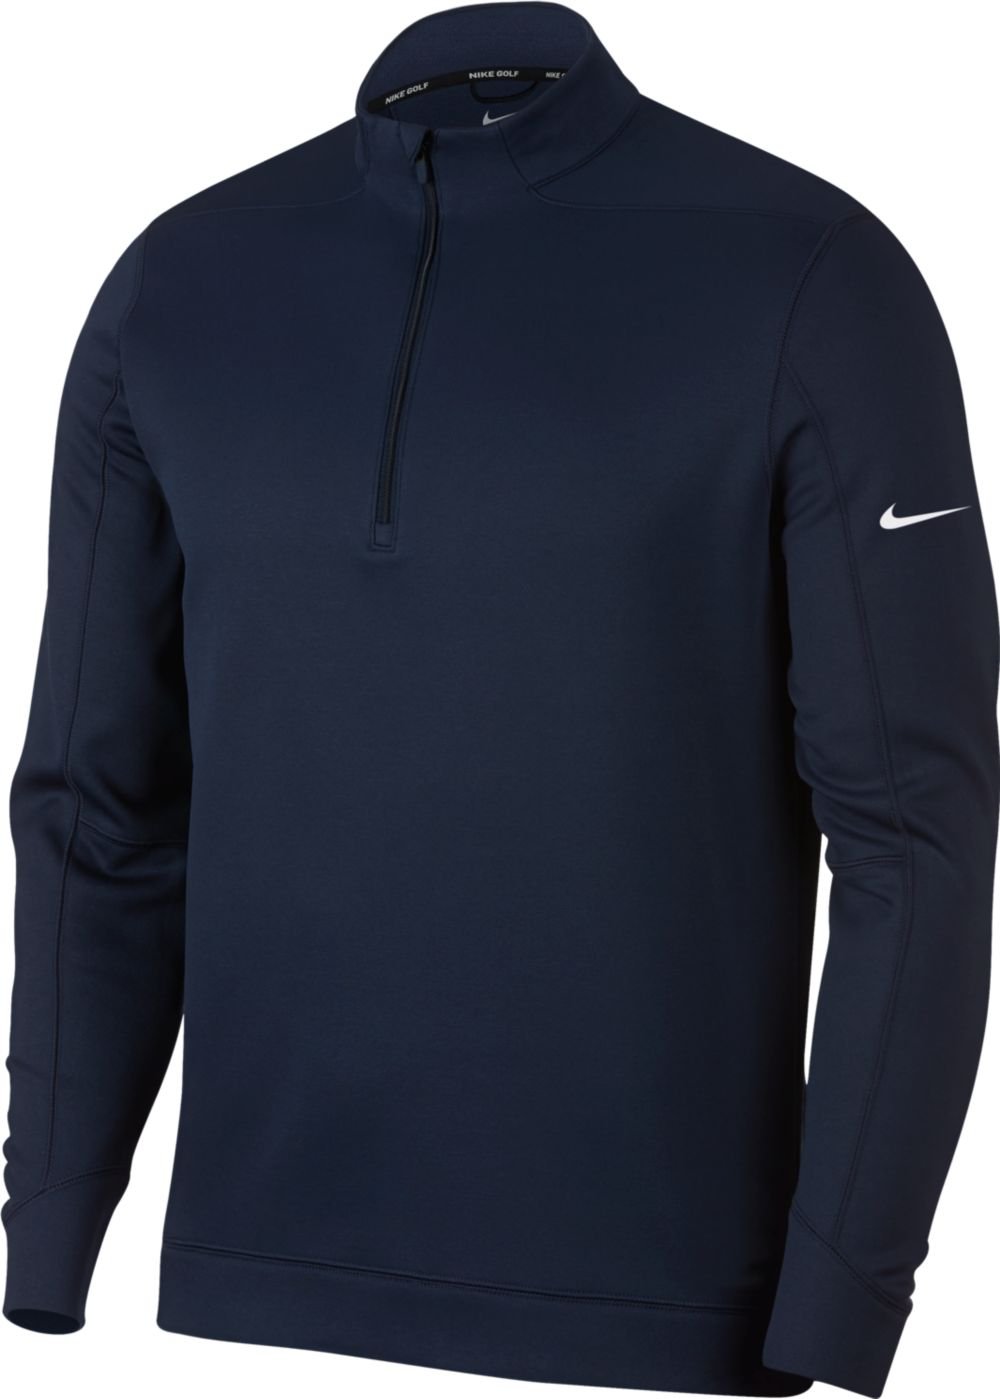 Nike Mens Therma Top Golf Pullovers